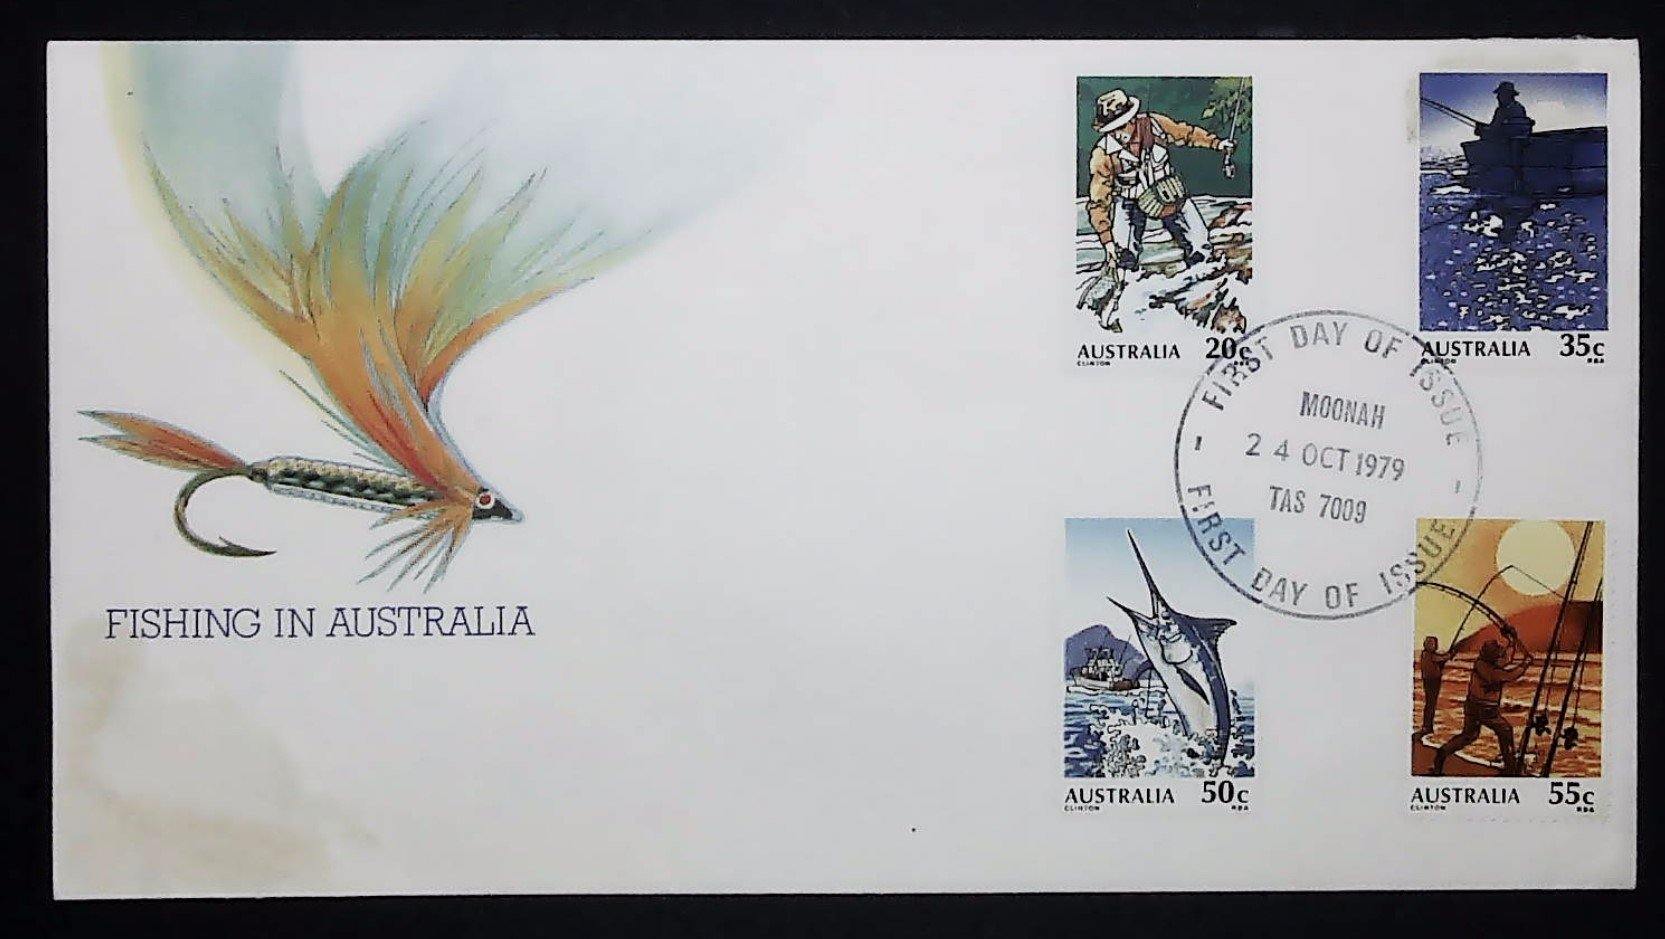 1979 Australian First Day Cover - Fishing in Australia - Loose Change Coins